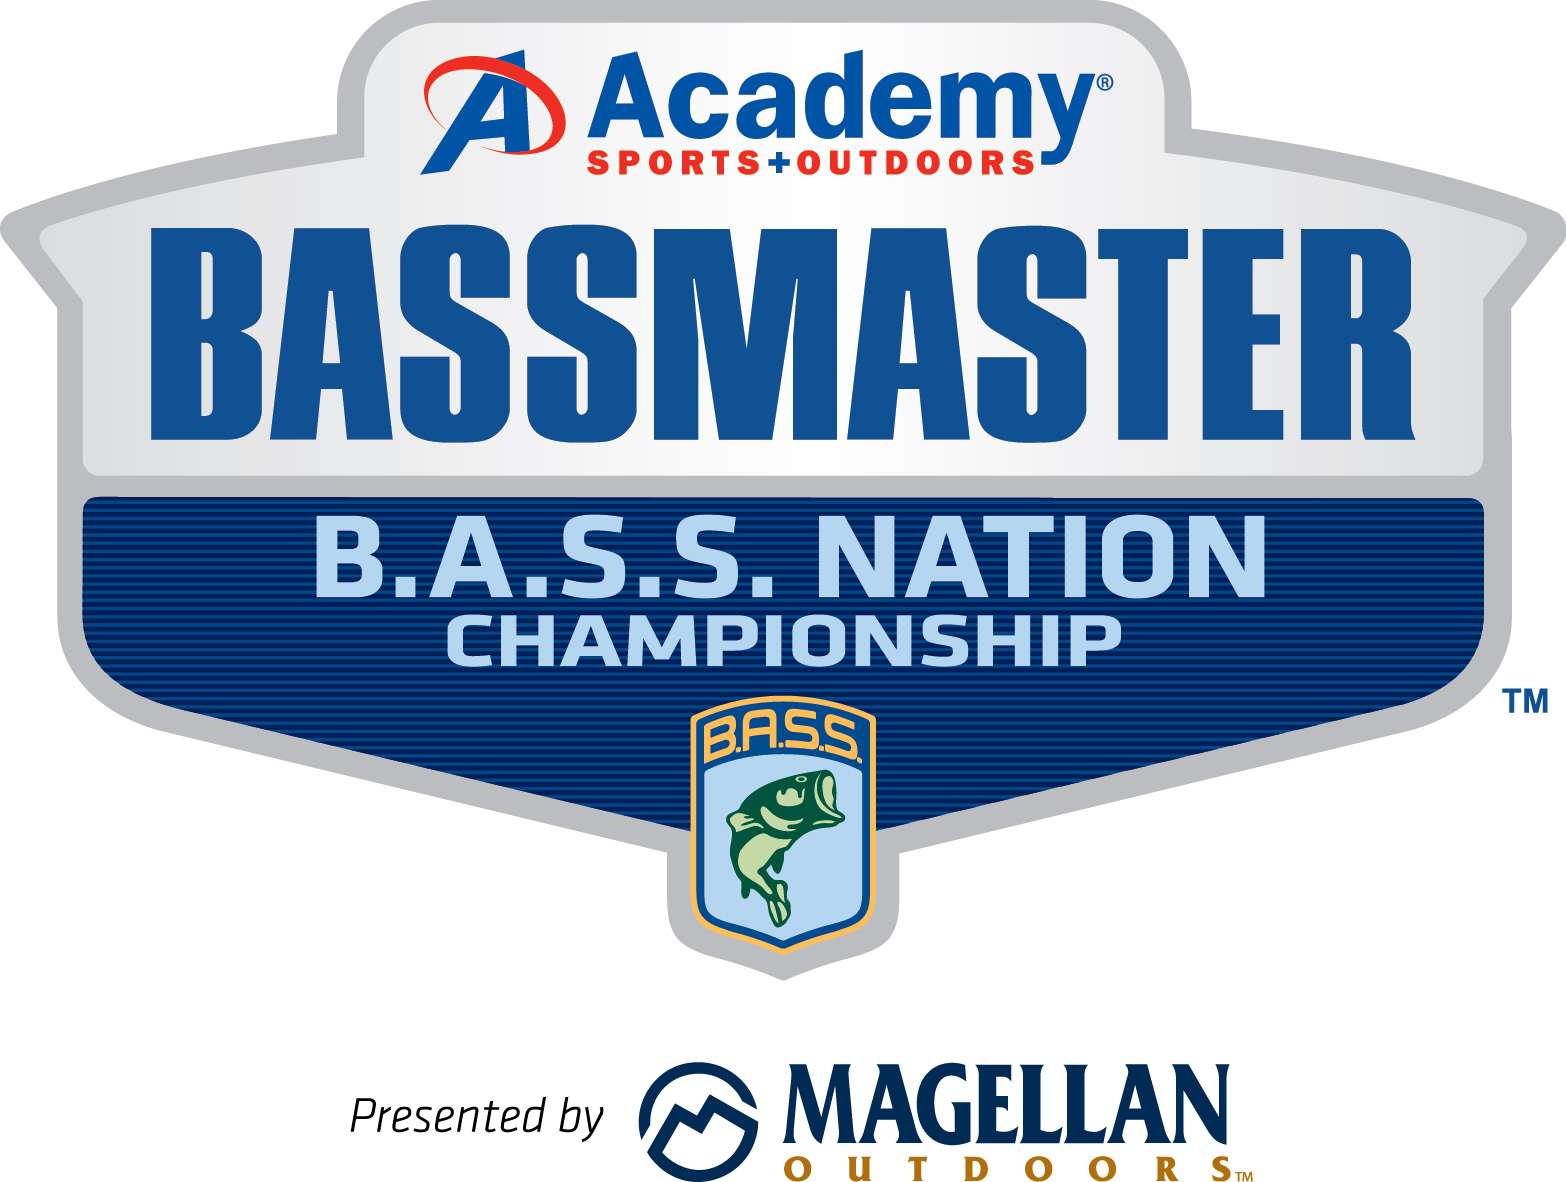 Keep up with the Nation Championship here at Bassmaster.com, Nov. 17-19! The Top 3 anglers will earn a berth in the 2017 GEICO Bassmaster Classic presented by GoPro, March 24-26, 2017.